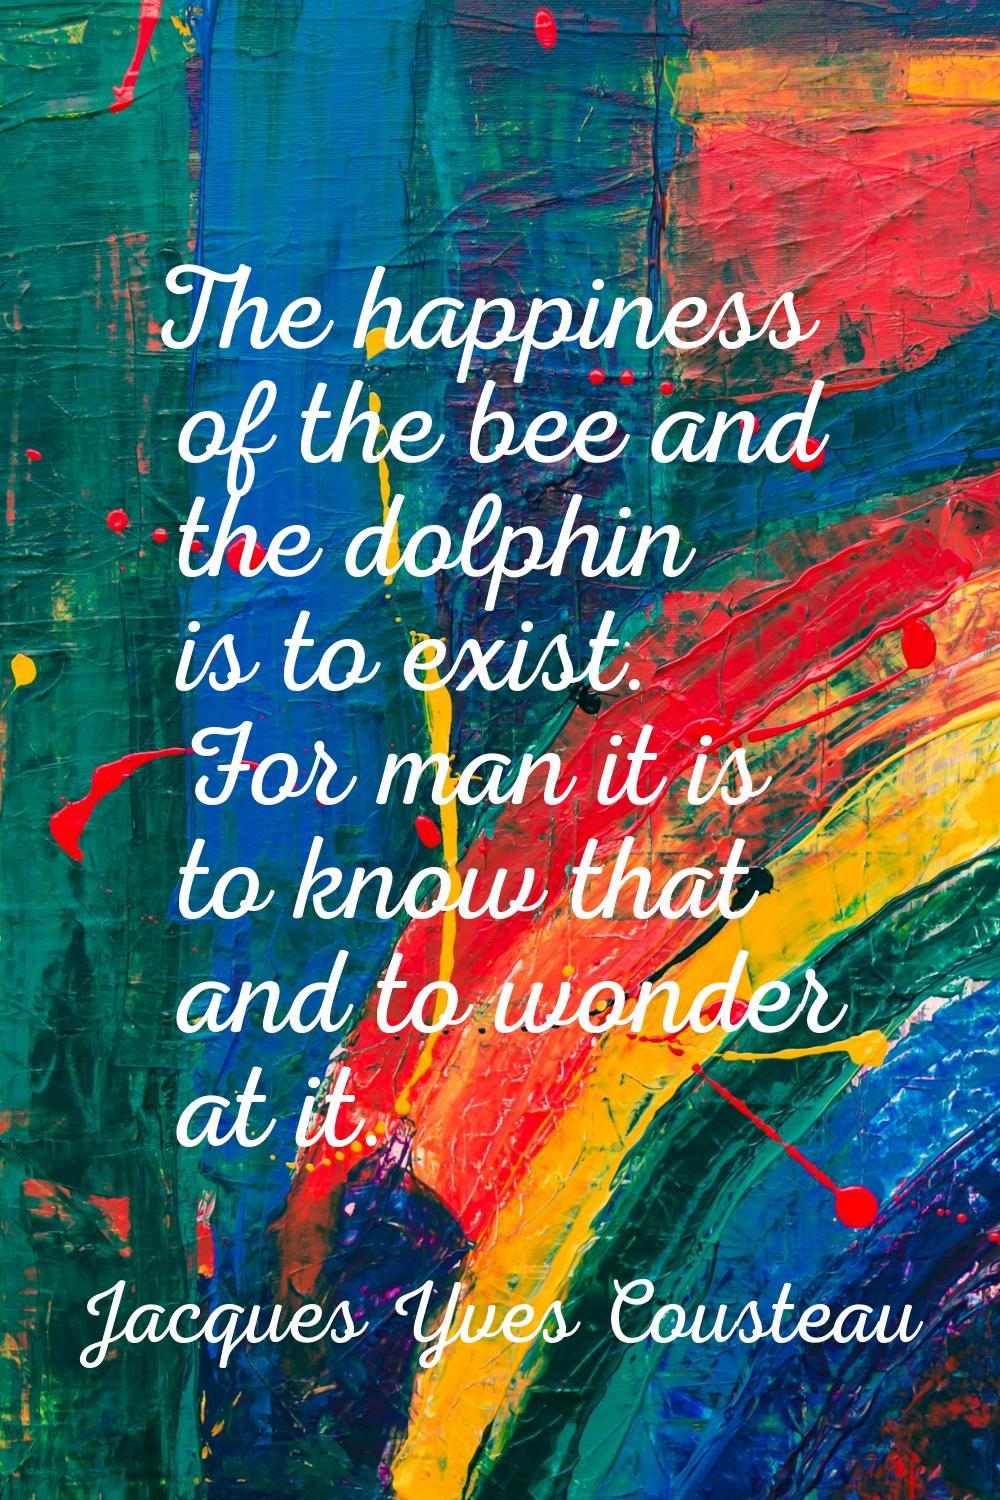 The happiness of the bee and the dolphin is to exist. For man it is to know that and to wonder at i